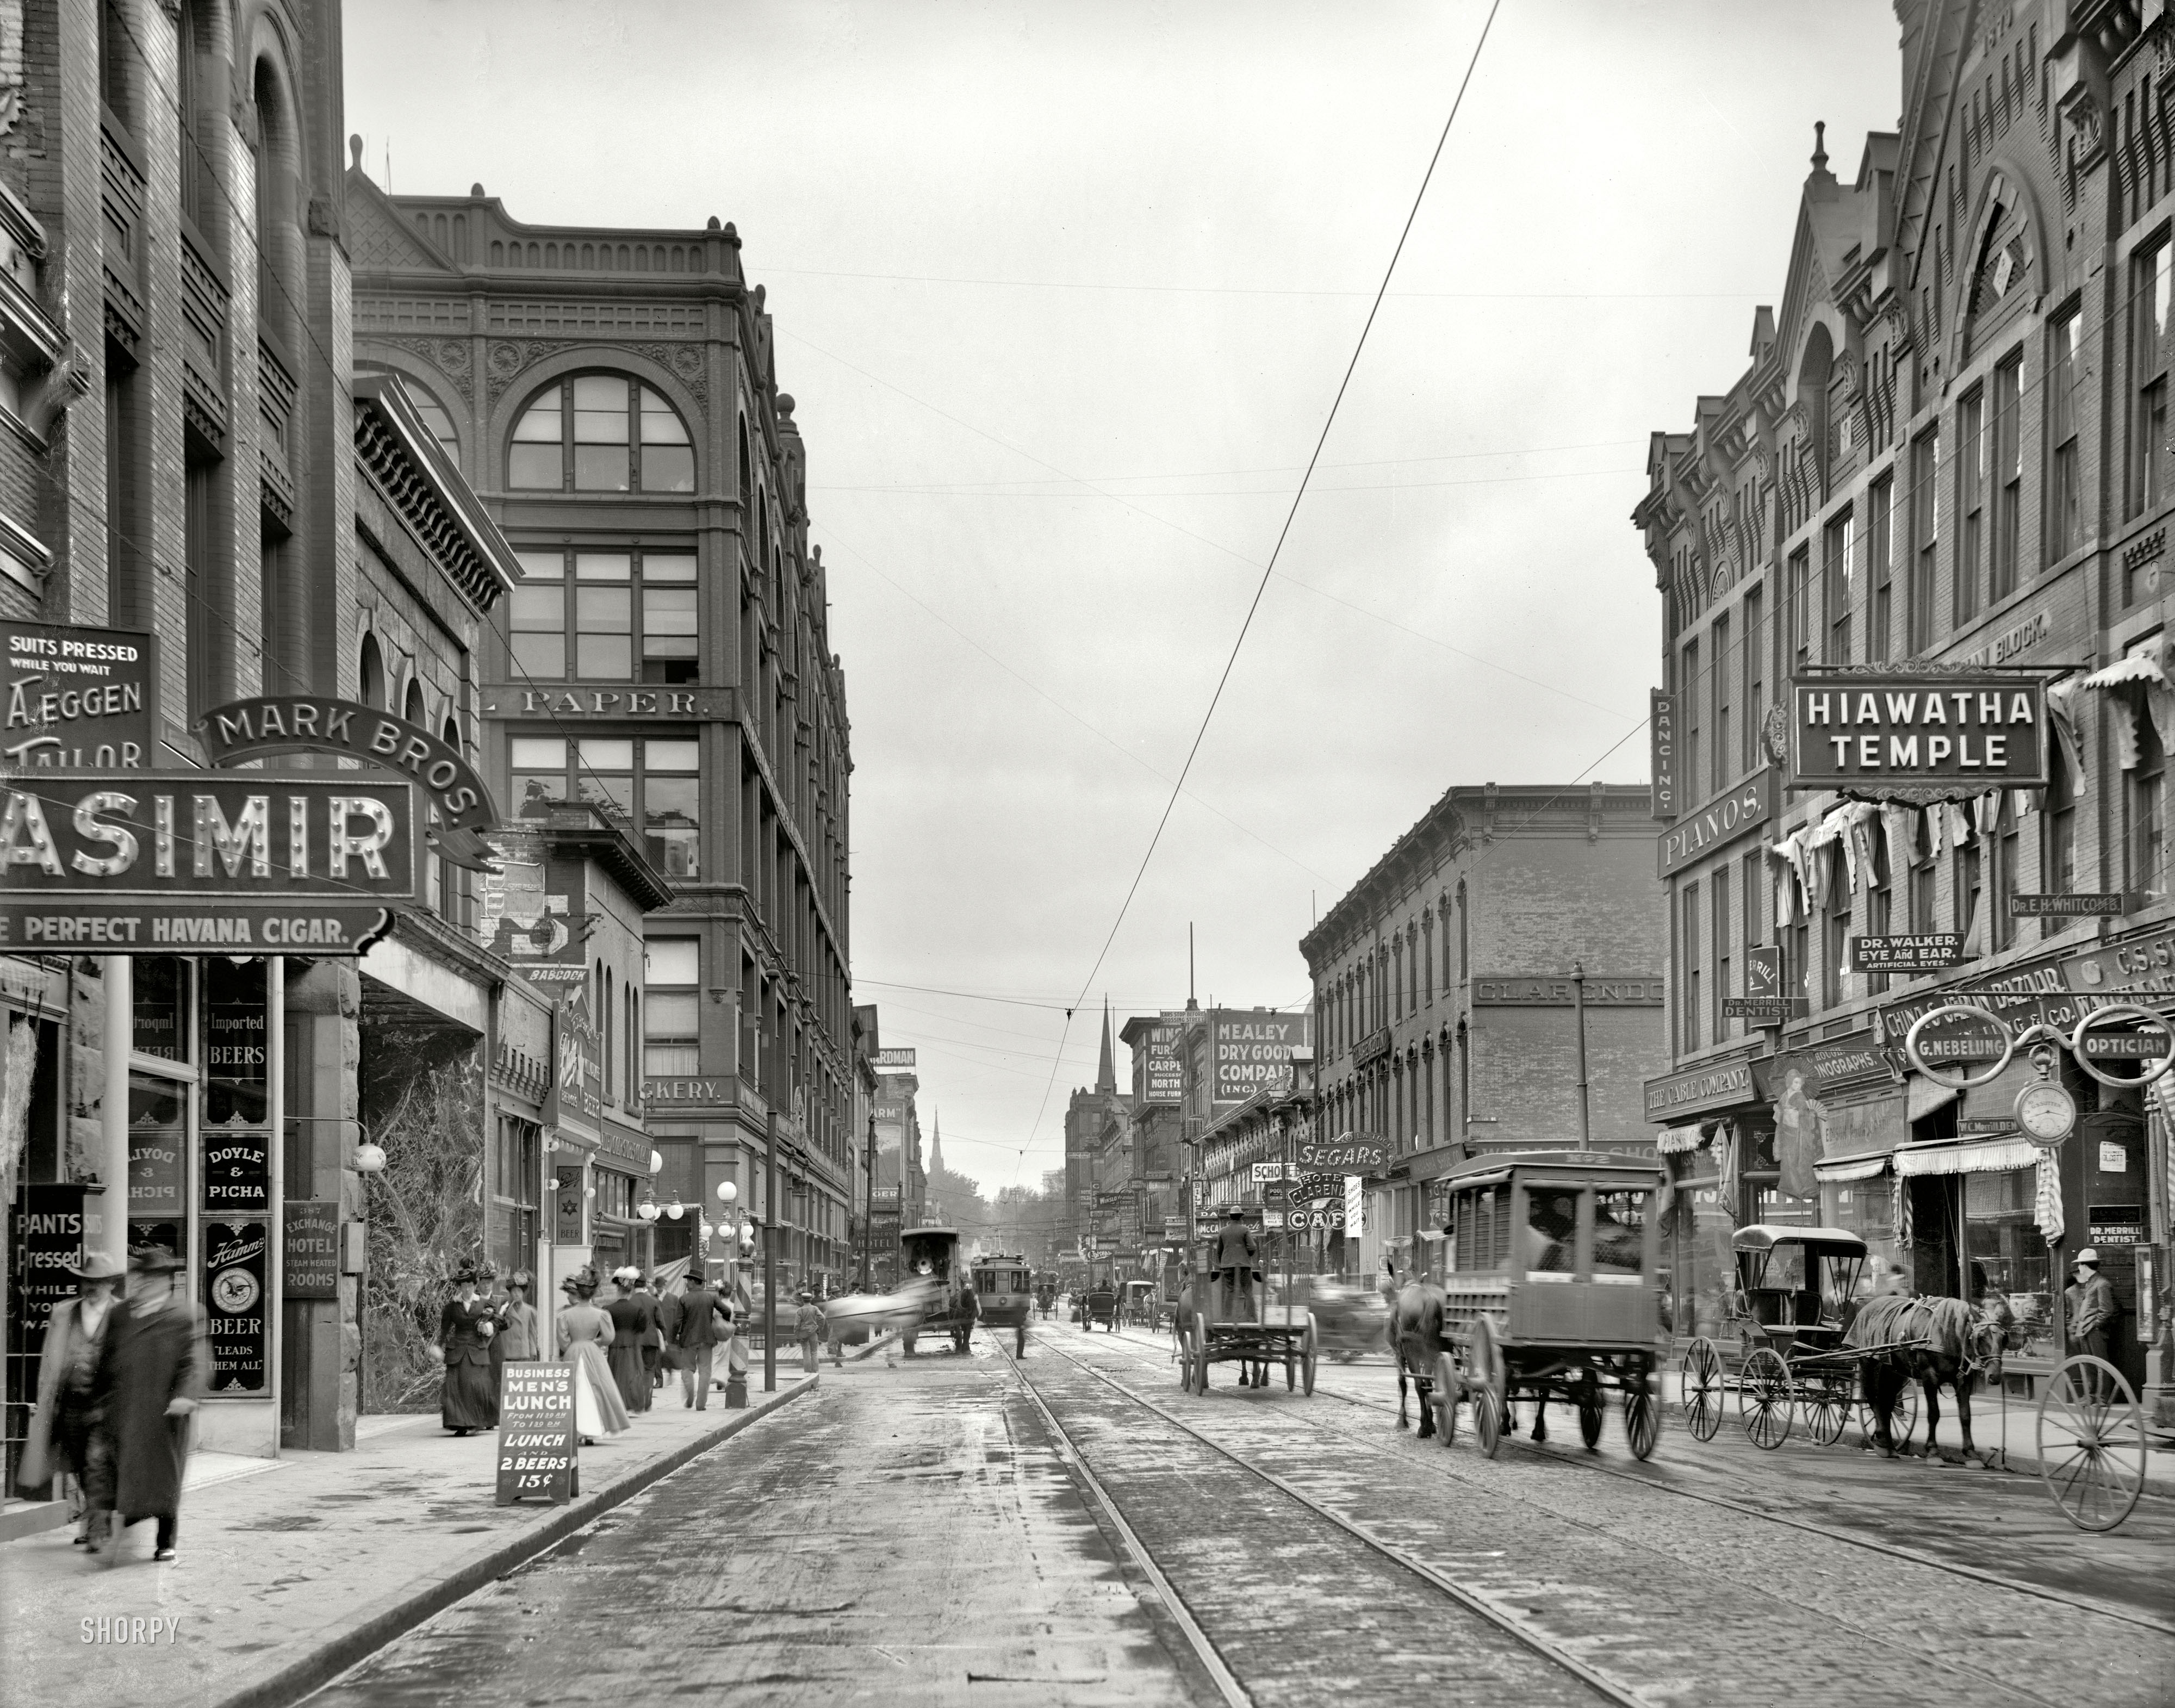 St. Paul, Minnesota, circa 1908. "Wabasha Street." Abundantly equipped with the standbys that Shorpians will recognize as essential to a smoothly functioning business district: fraternal organization, painless dental parlors, purveyors of cigars and prosthetic eyeballs, optician-jeweler (with the 8:17 clock-sign) and, last but not least, "Business Men's Lunch (And 2 Beers)" for 15 cents. 8x10 inch glass negative. View full size.